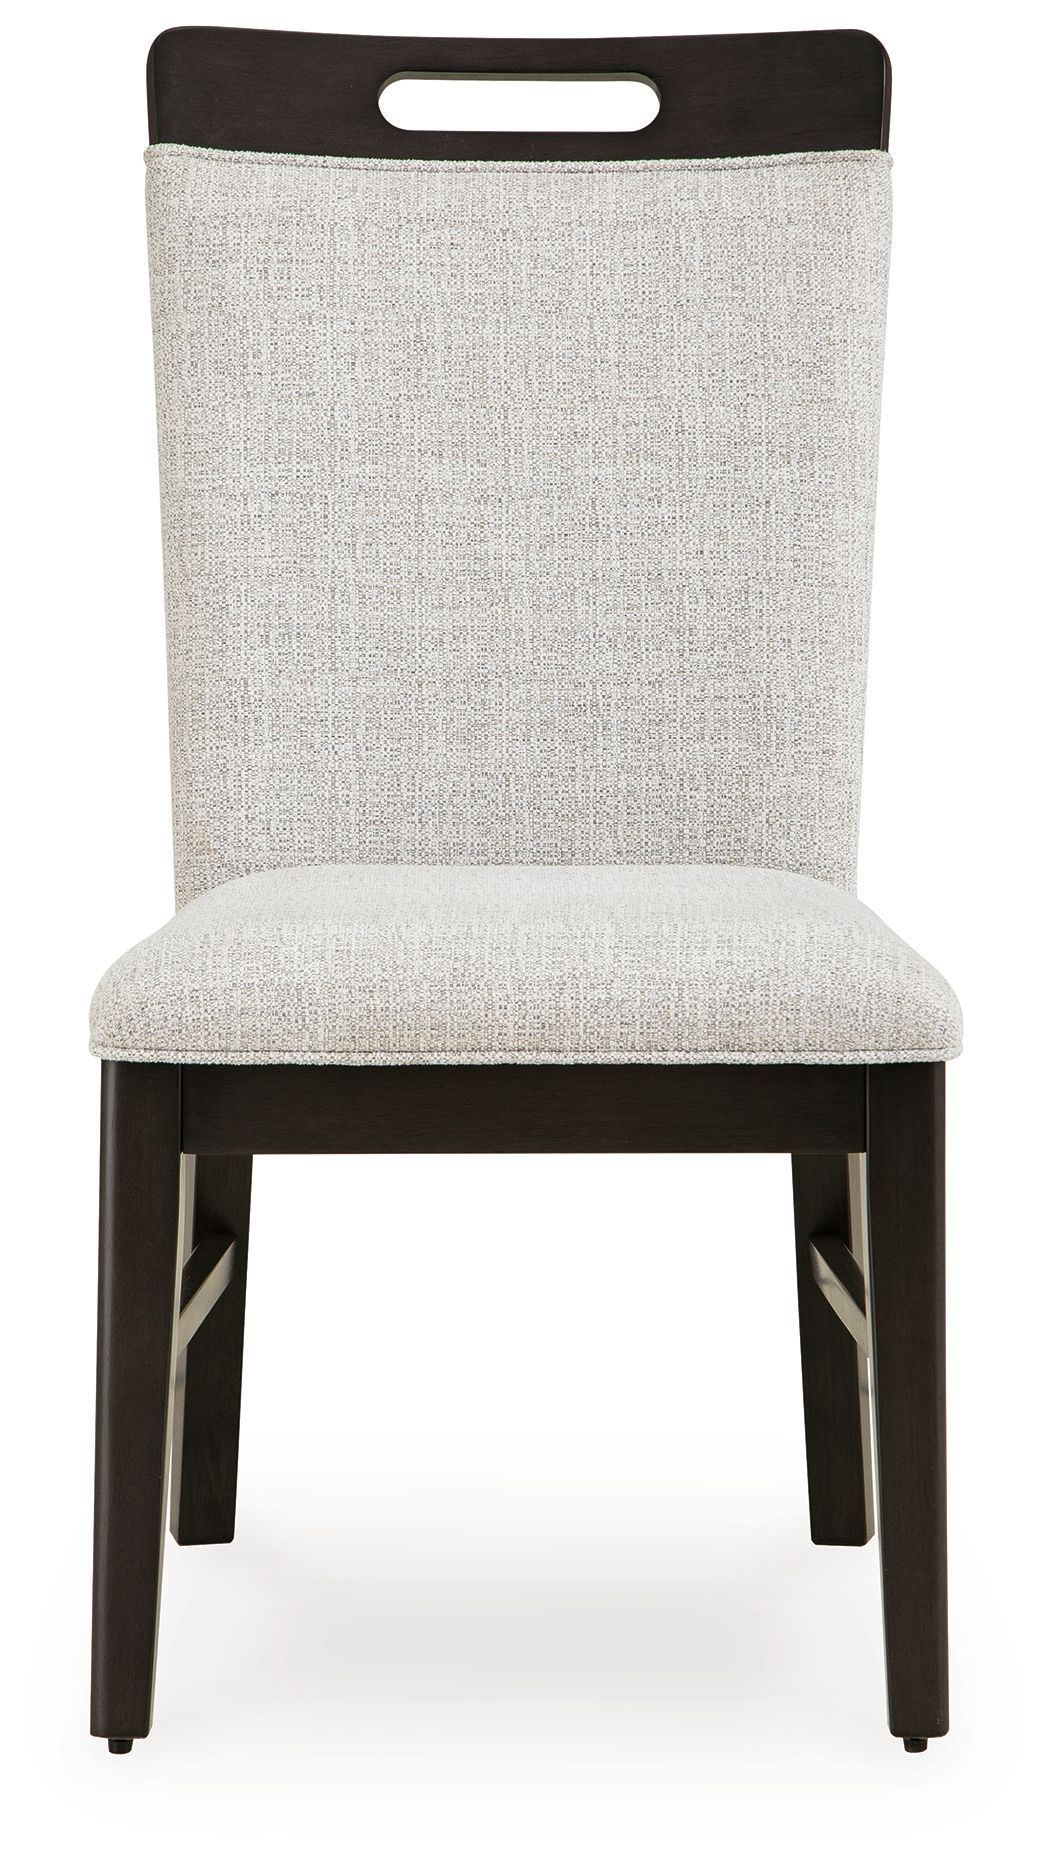 Neymorton - Light Gray / Brown - Dining Upholstered Side Chair (Set of 2) - Tony's Home Furnishings